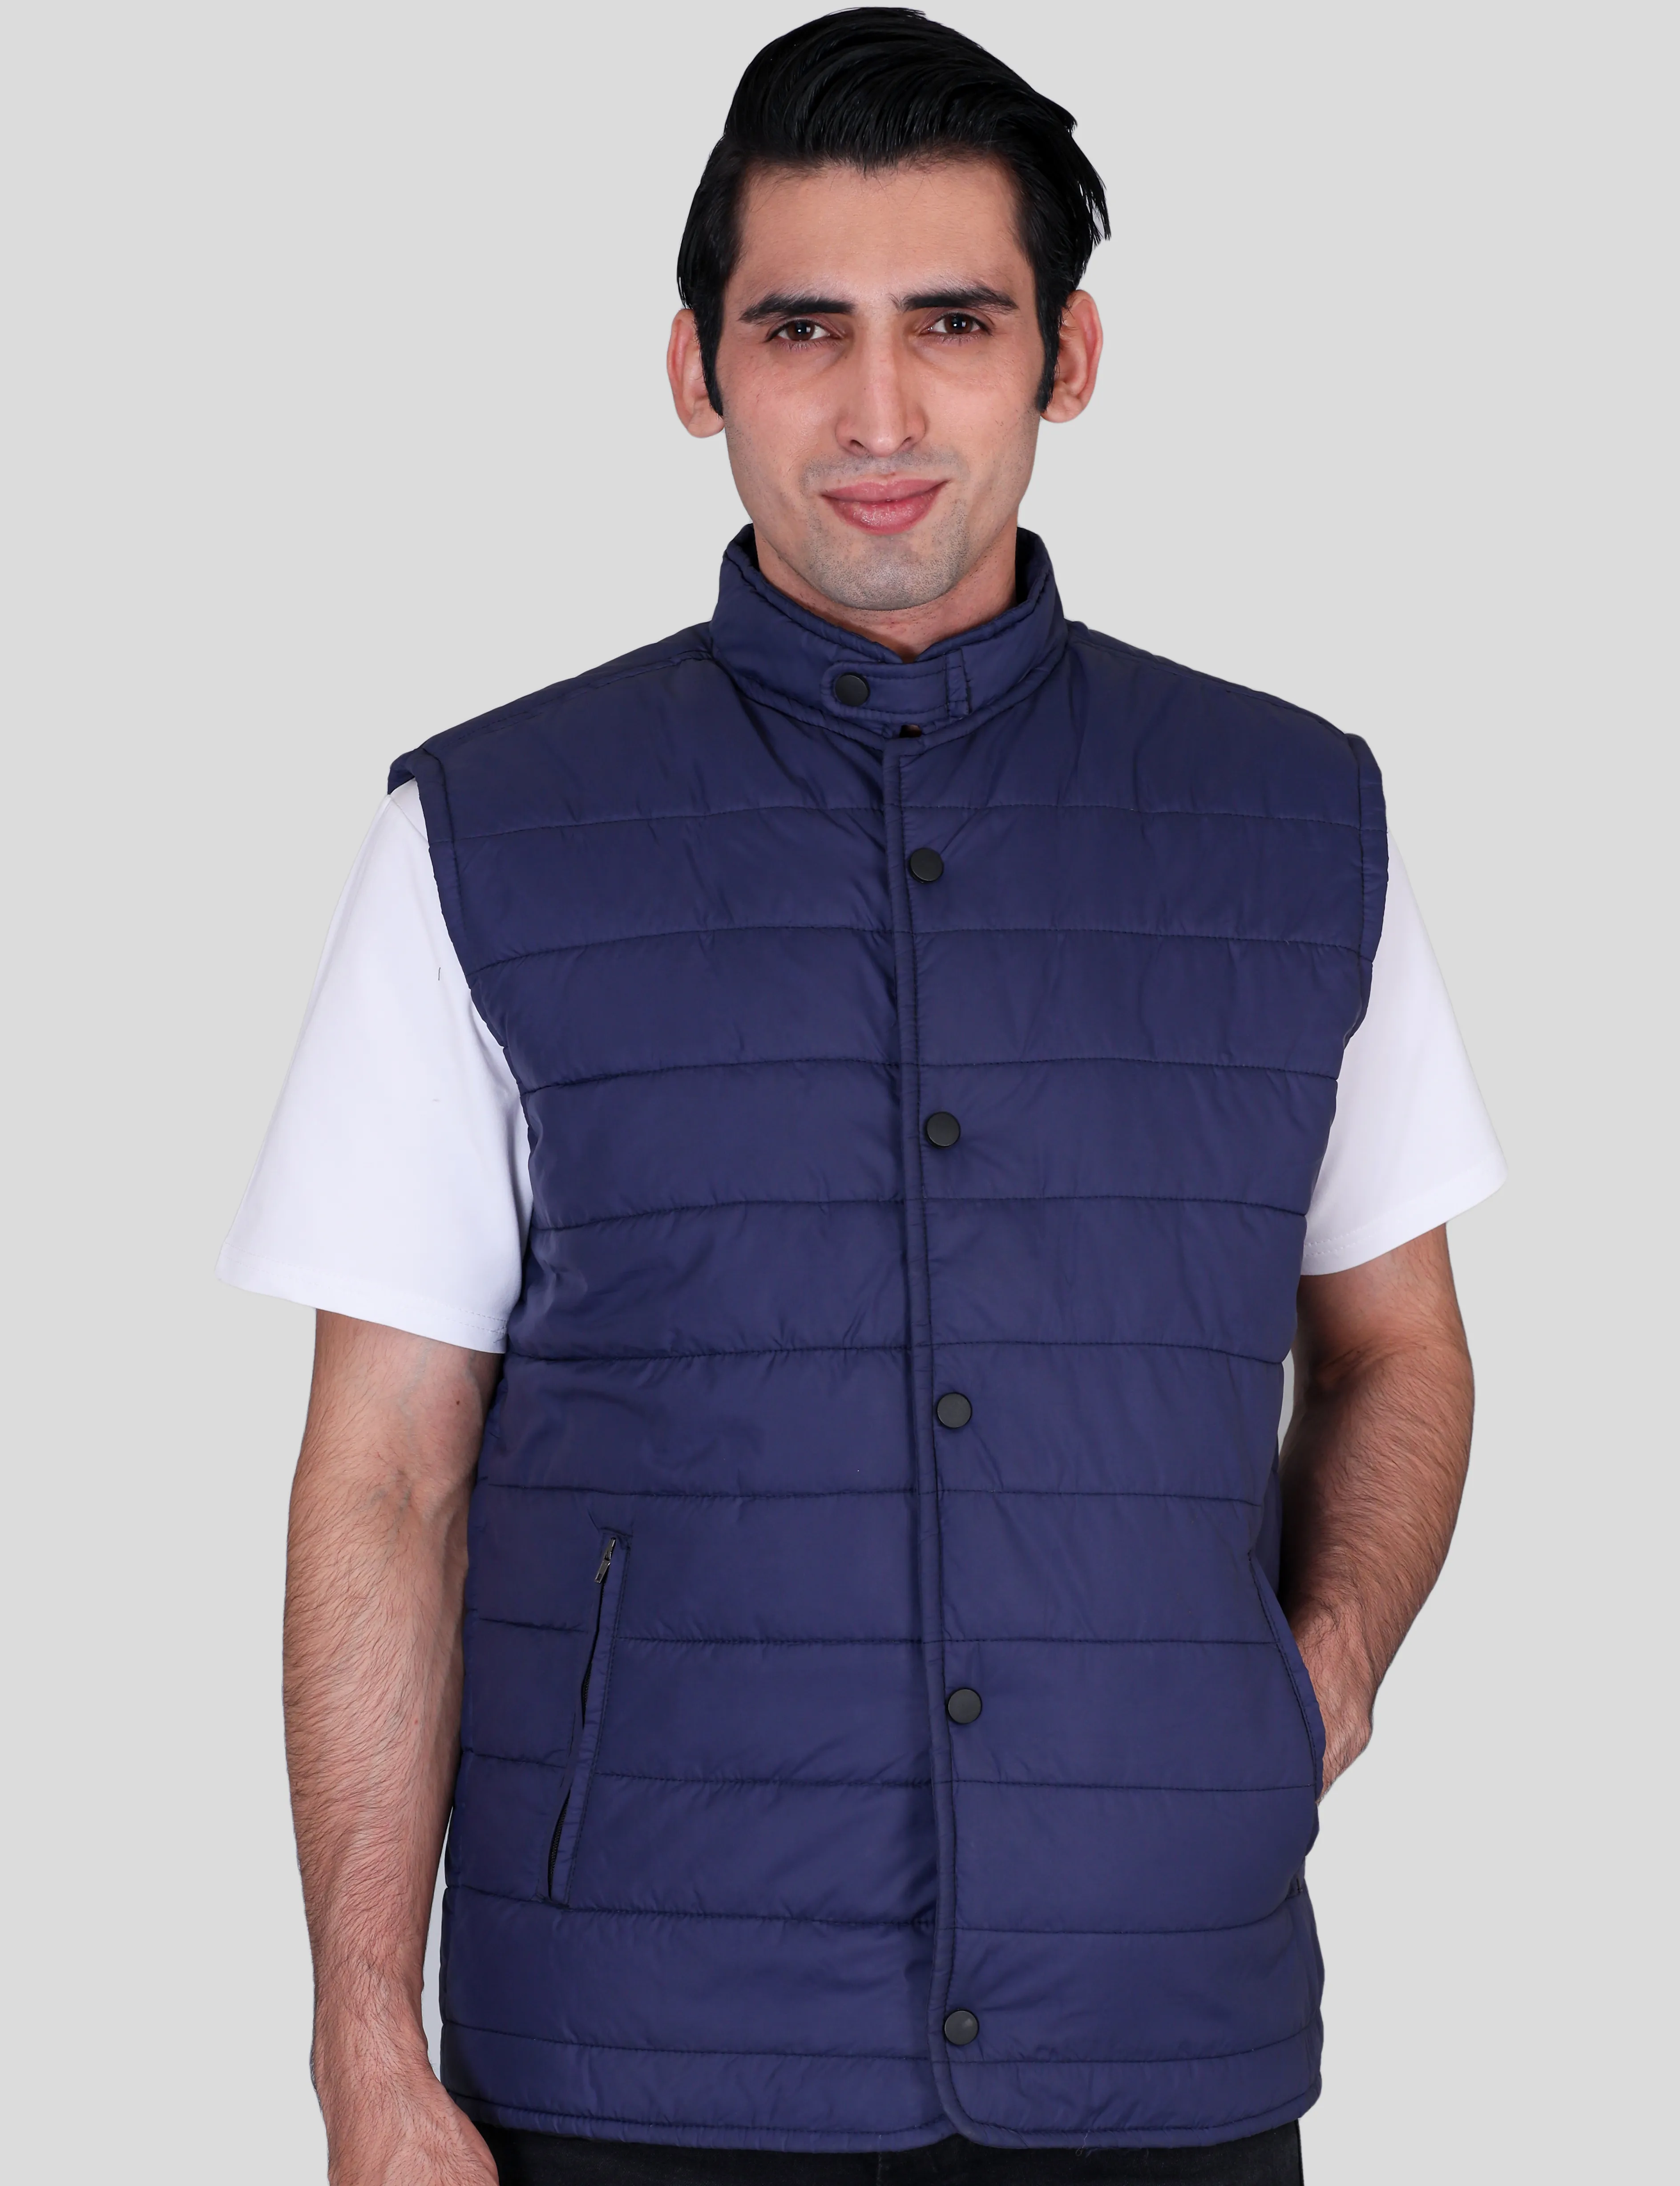 Personalized jackets manufacturer in delhi